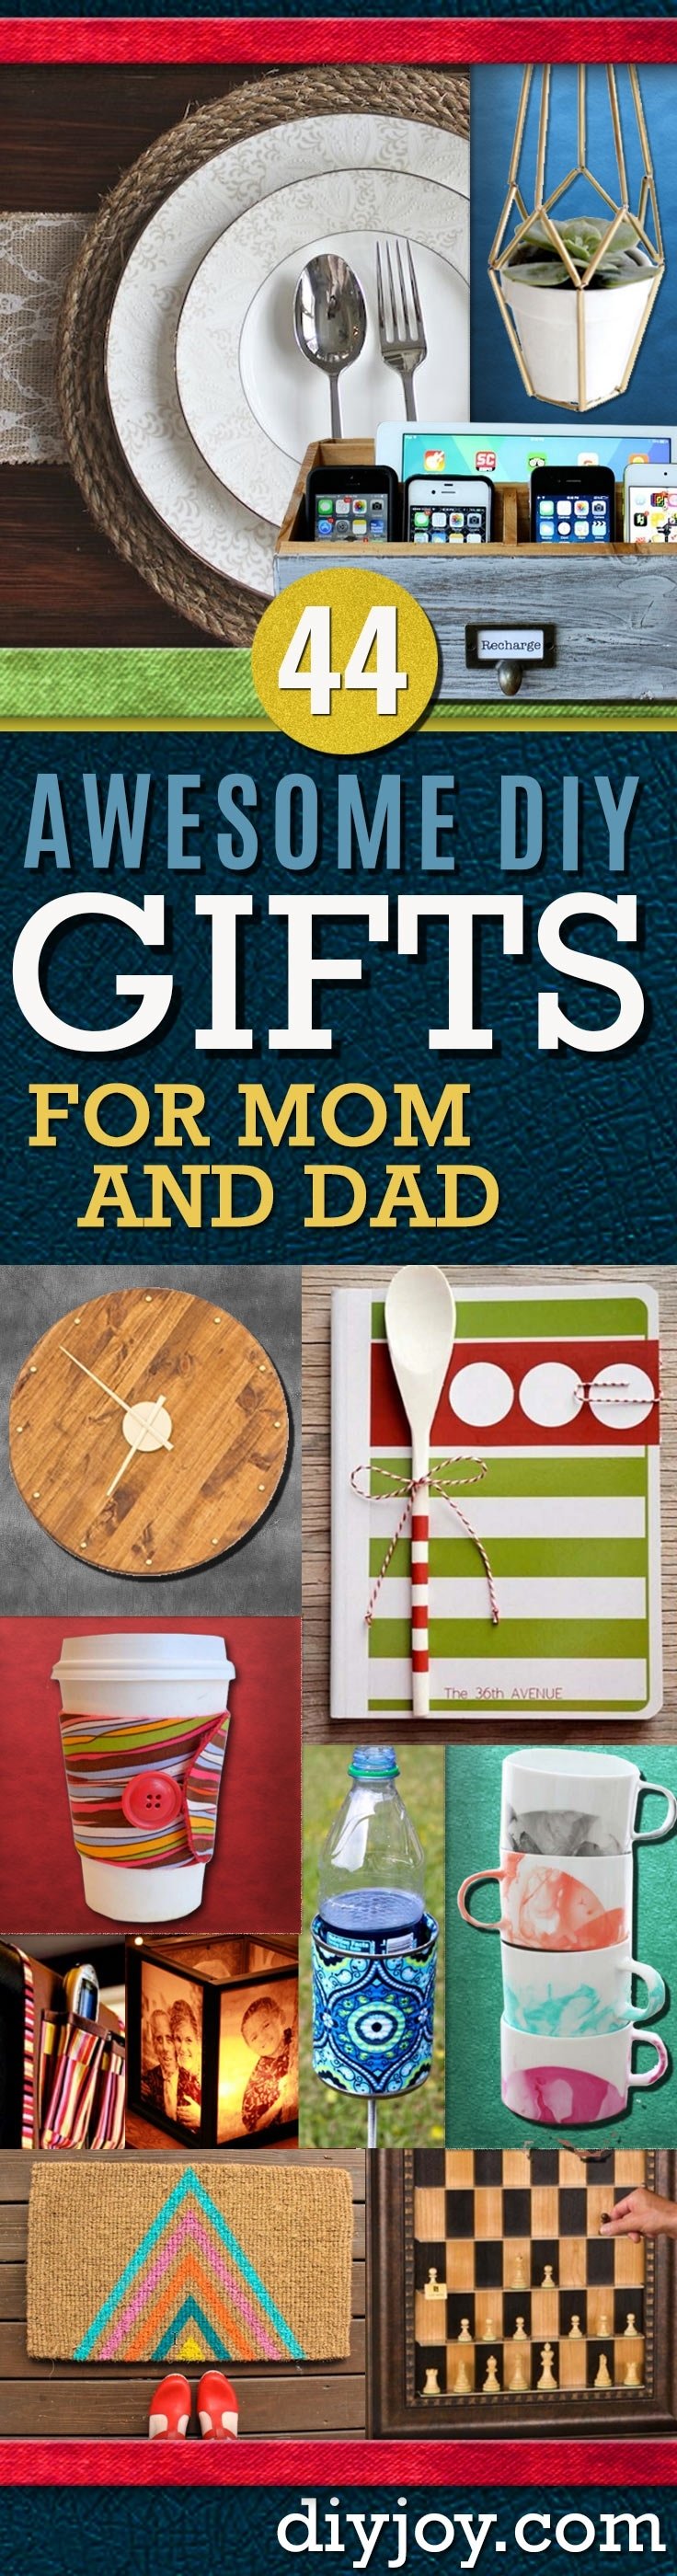 10 Most Recommended Gift Ideas For Dad Christmas awesome diy gift ideas mom and dad will love 6 2022